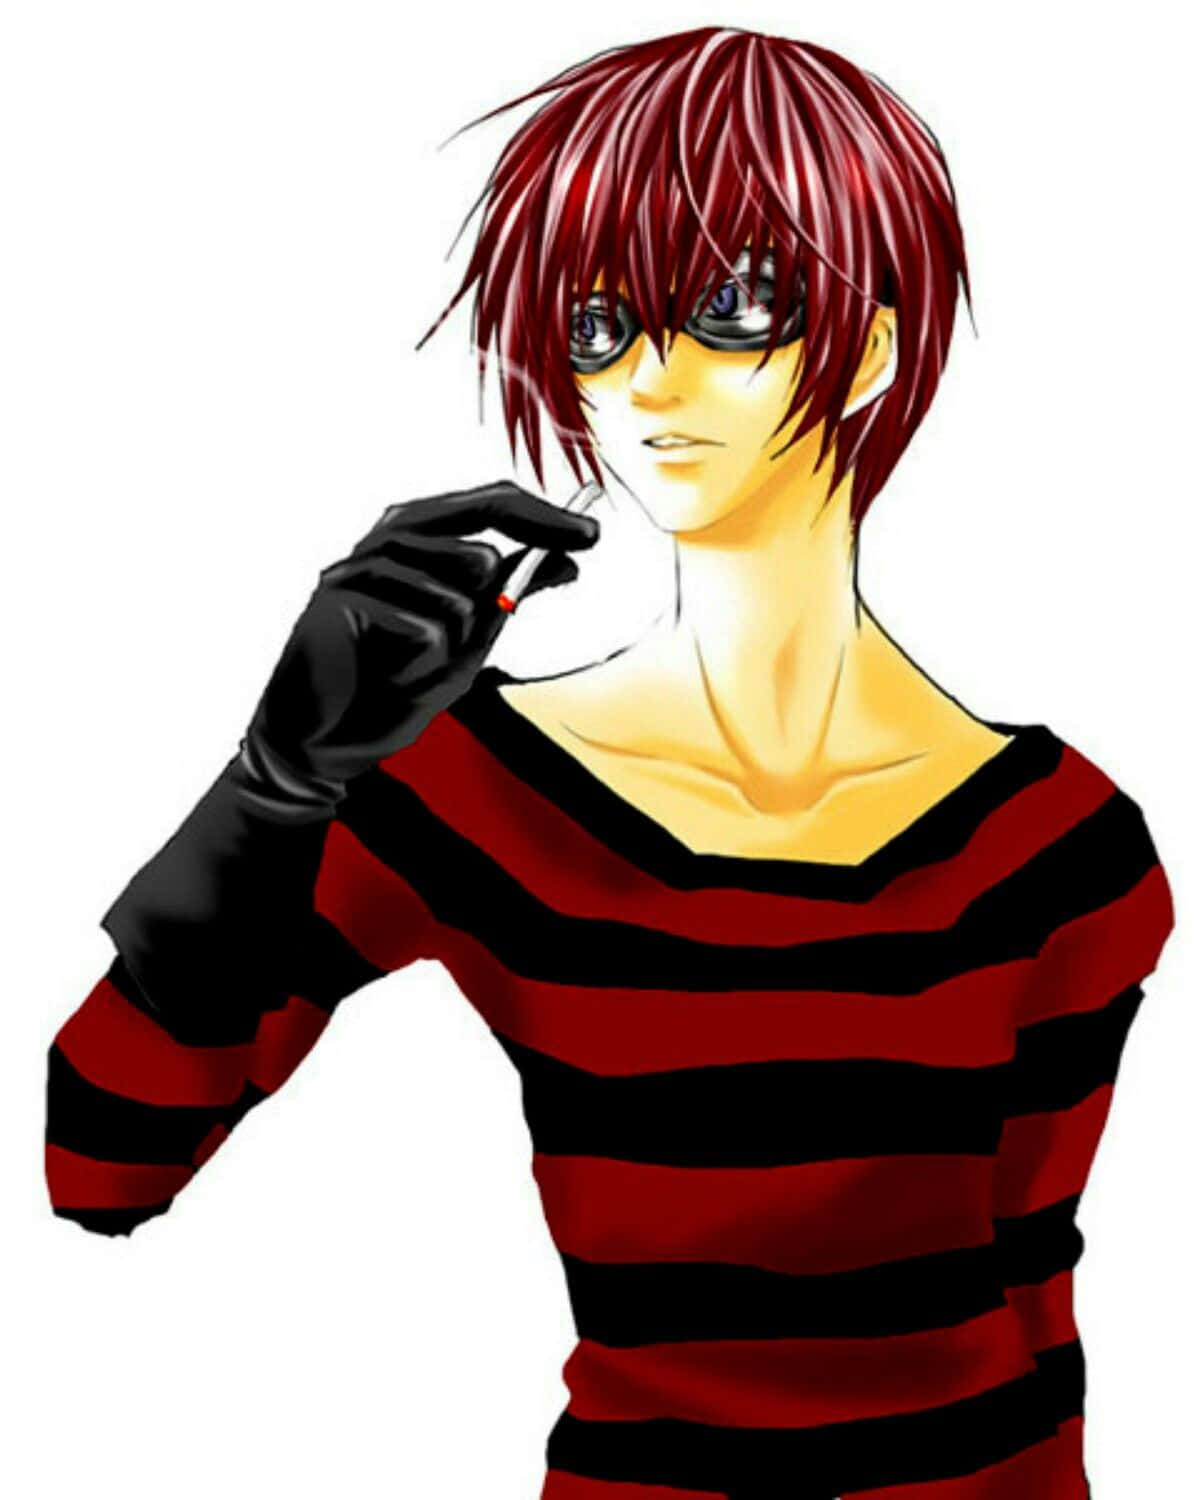 Caption: Matt from Death Note, the skilled hacker and master strategist Wallpaper